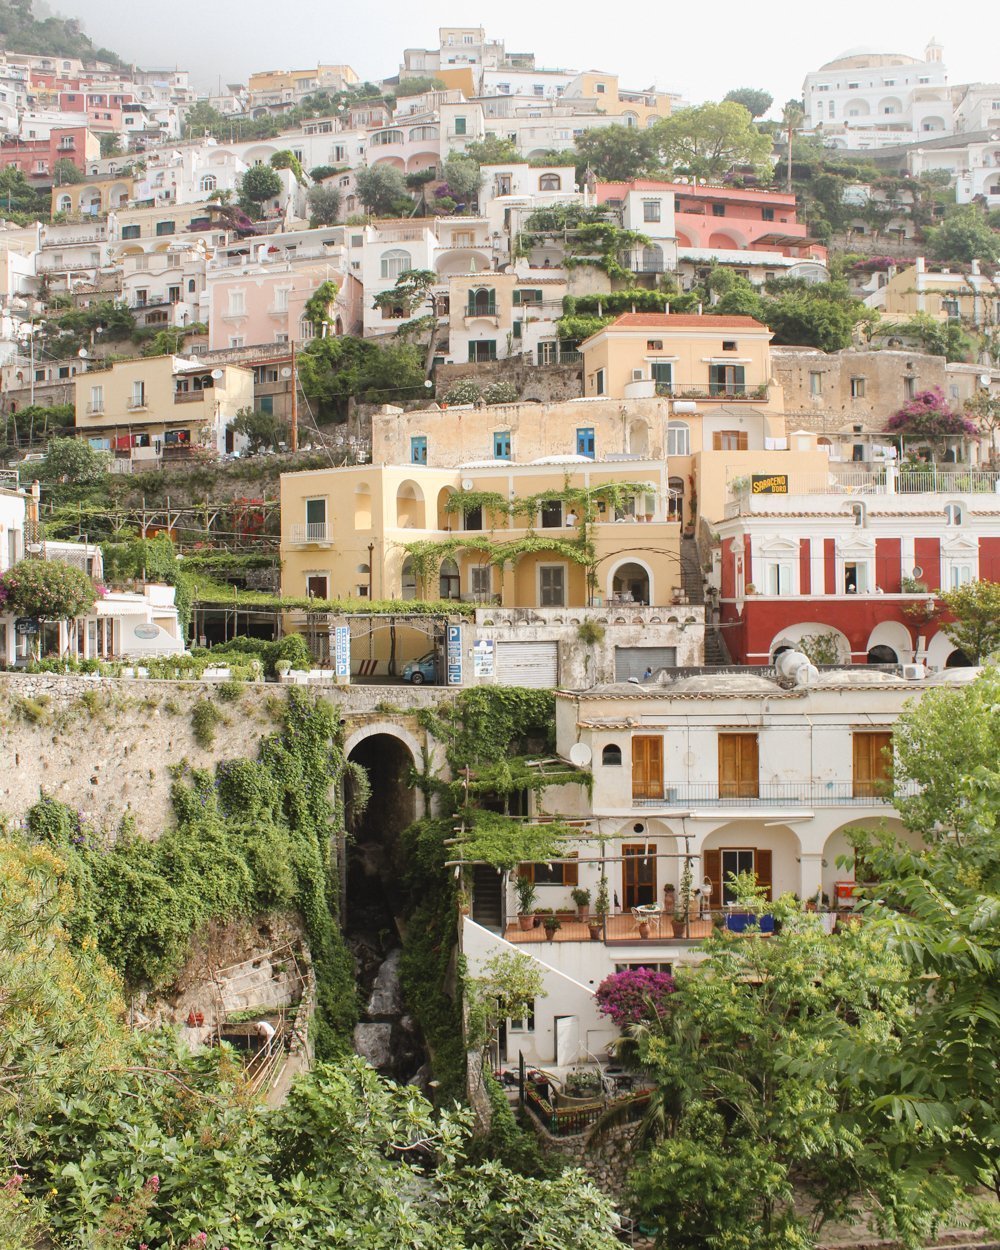 Positano buildings and tunnel